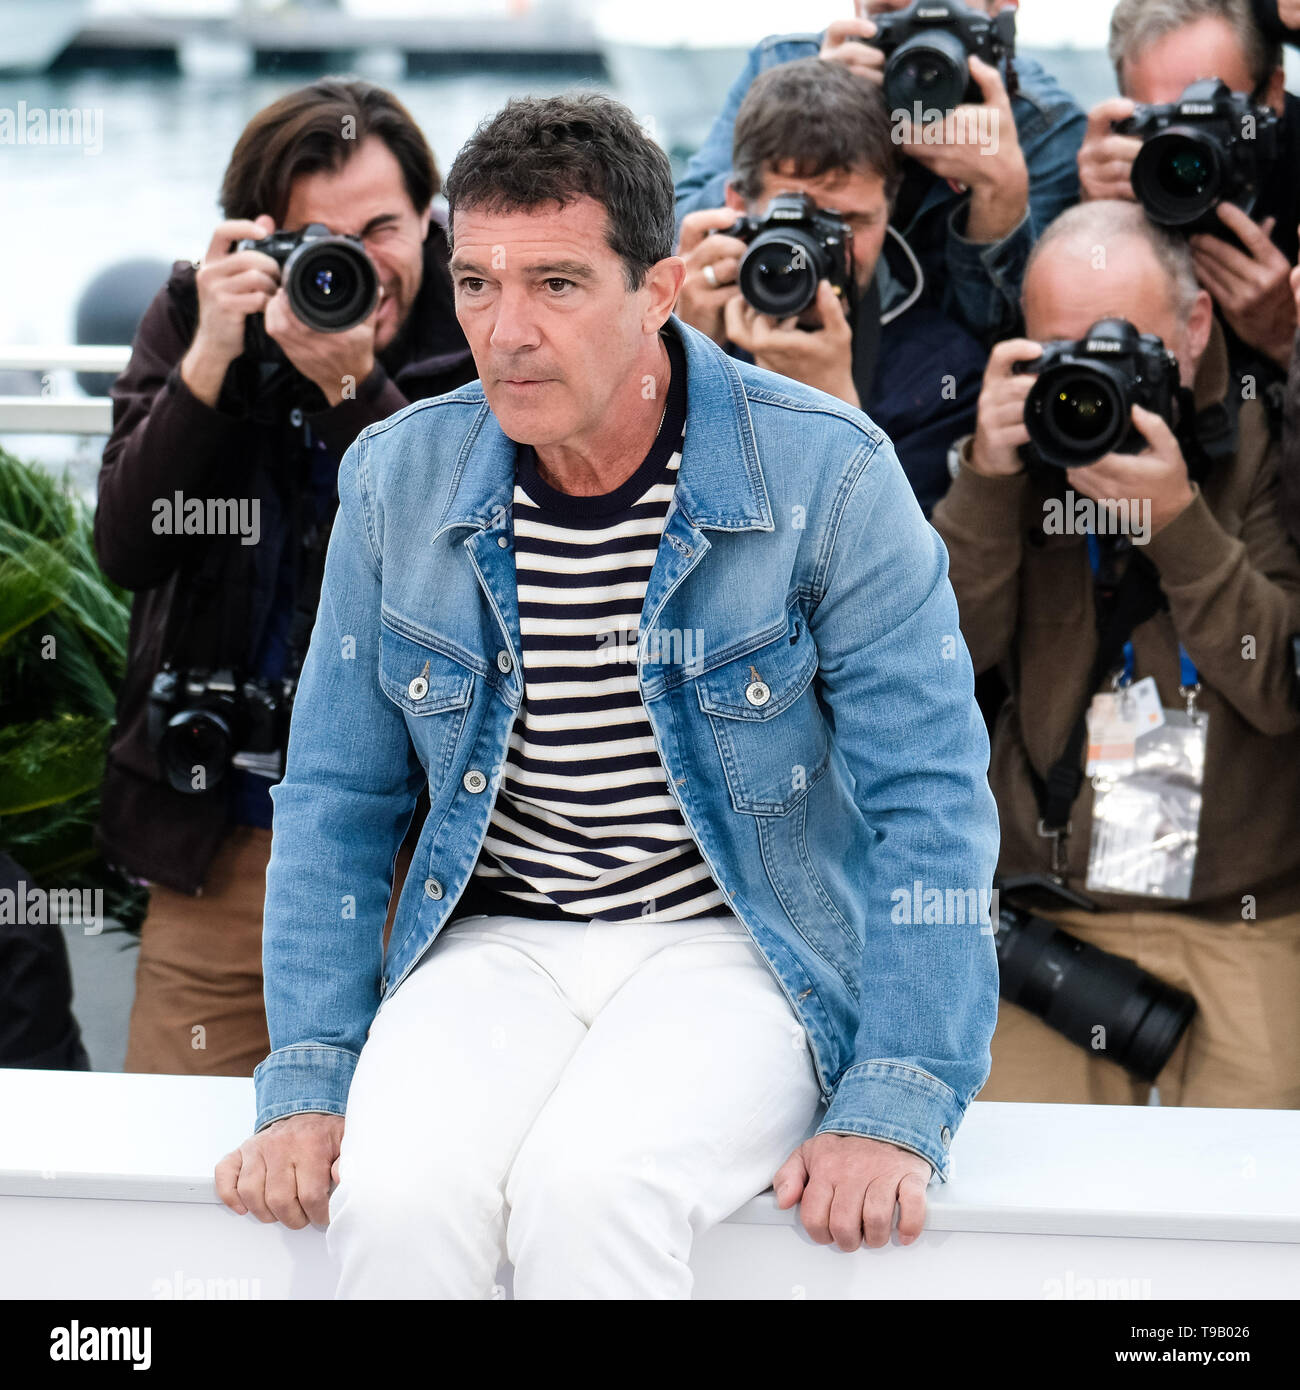 Cannes, France. 18th May, 2019. Antonio Banderas poses at a photocall for Pain and Glory (Dolor y gloria ) on Saturday 18 May 2019 at the 72nd Festival de Cannes, Palais des Festivals, Cannes. Pictured: Antonio Banderas. Picture by Credit: Julie Edwards/Alamy Live News Stock Photo